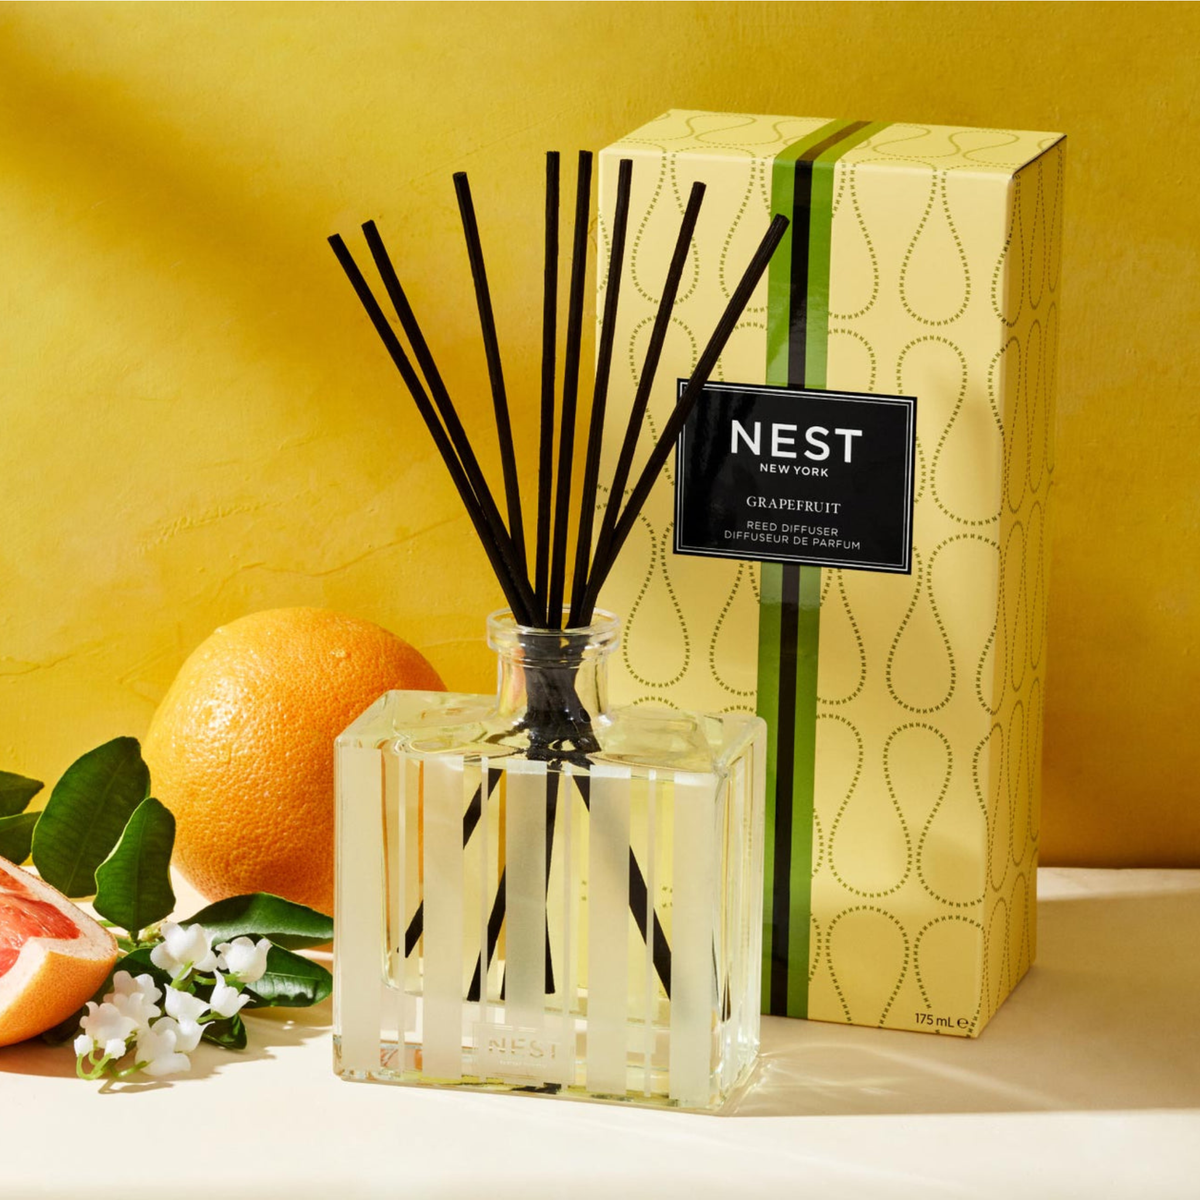 Nest New York’s Grapefruit Reed Diffuser Lifestyle With Box